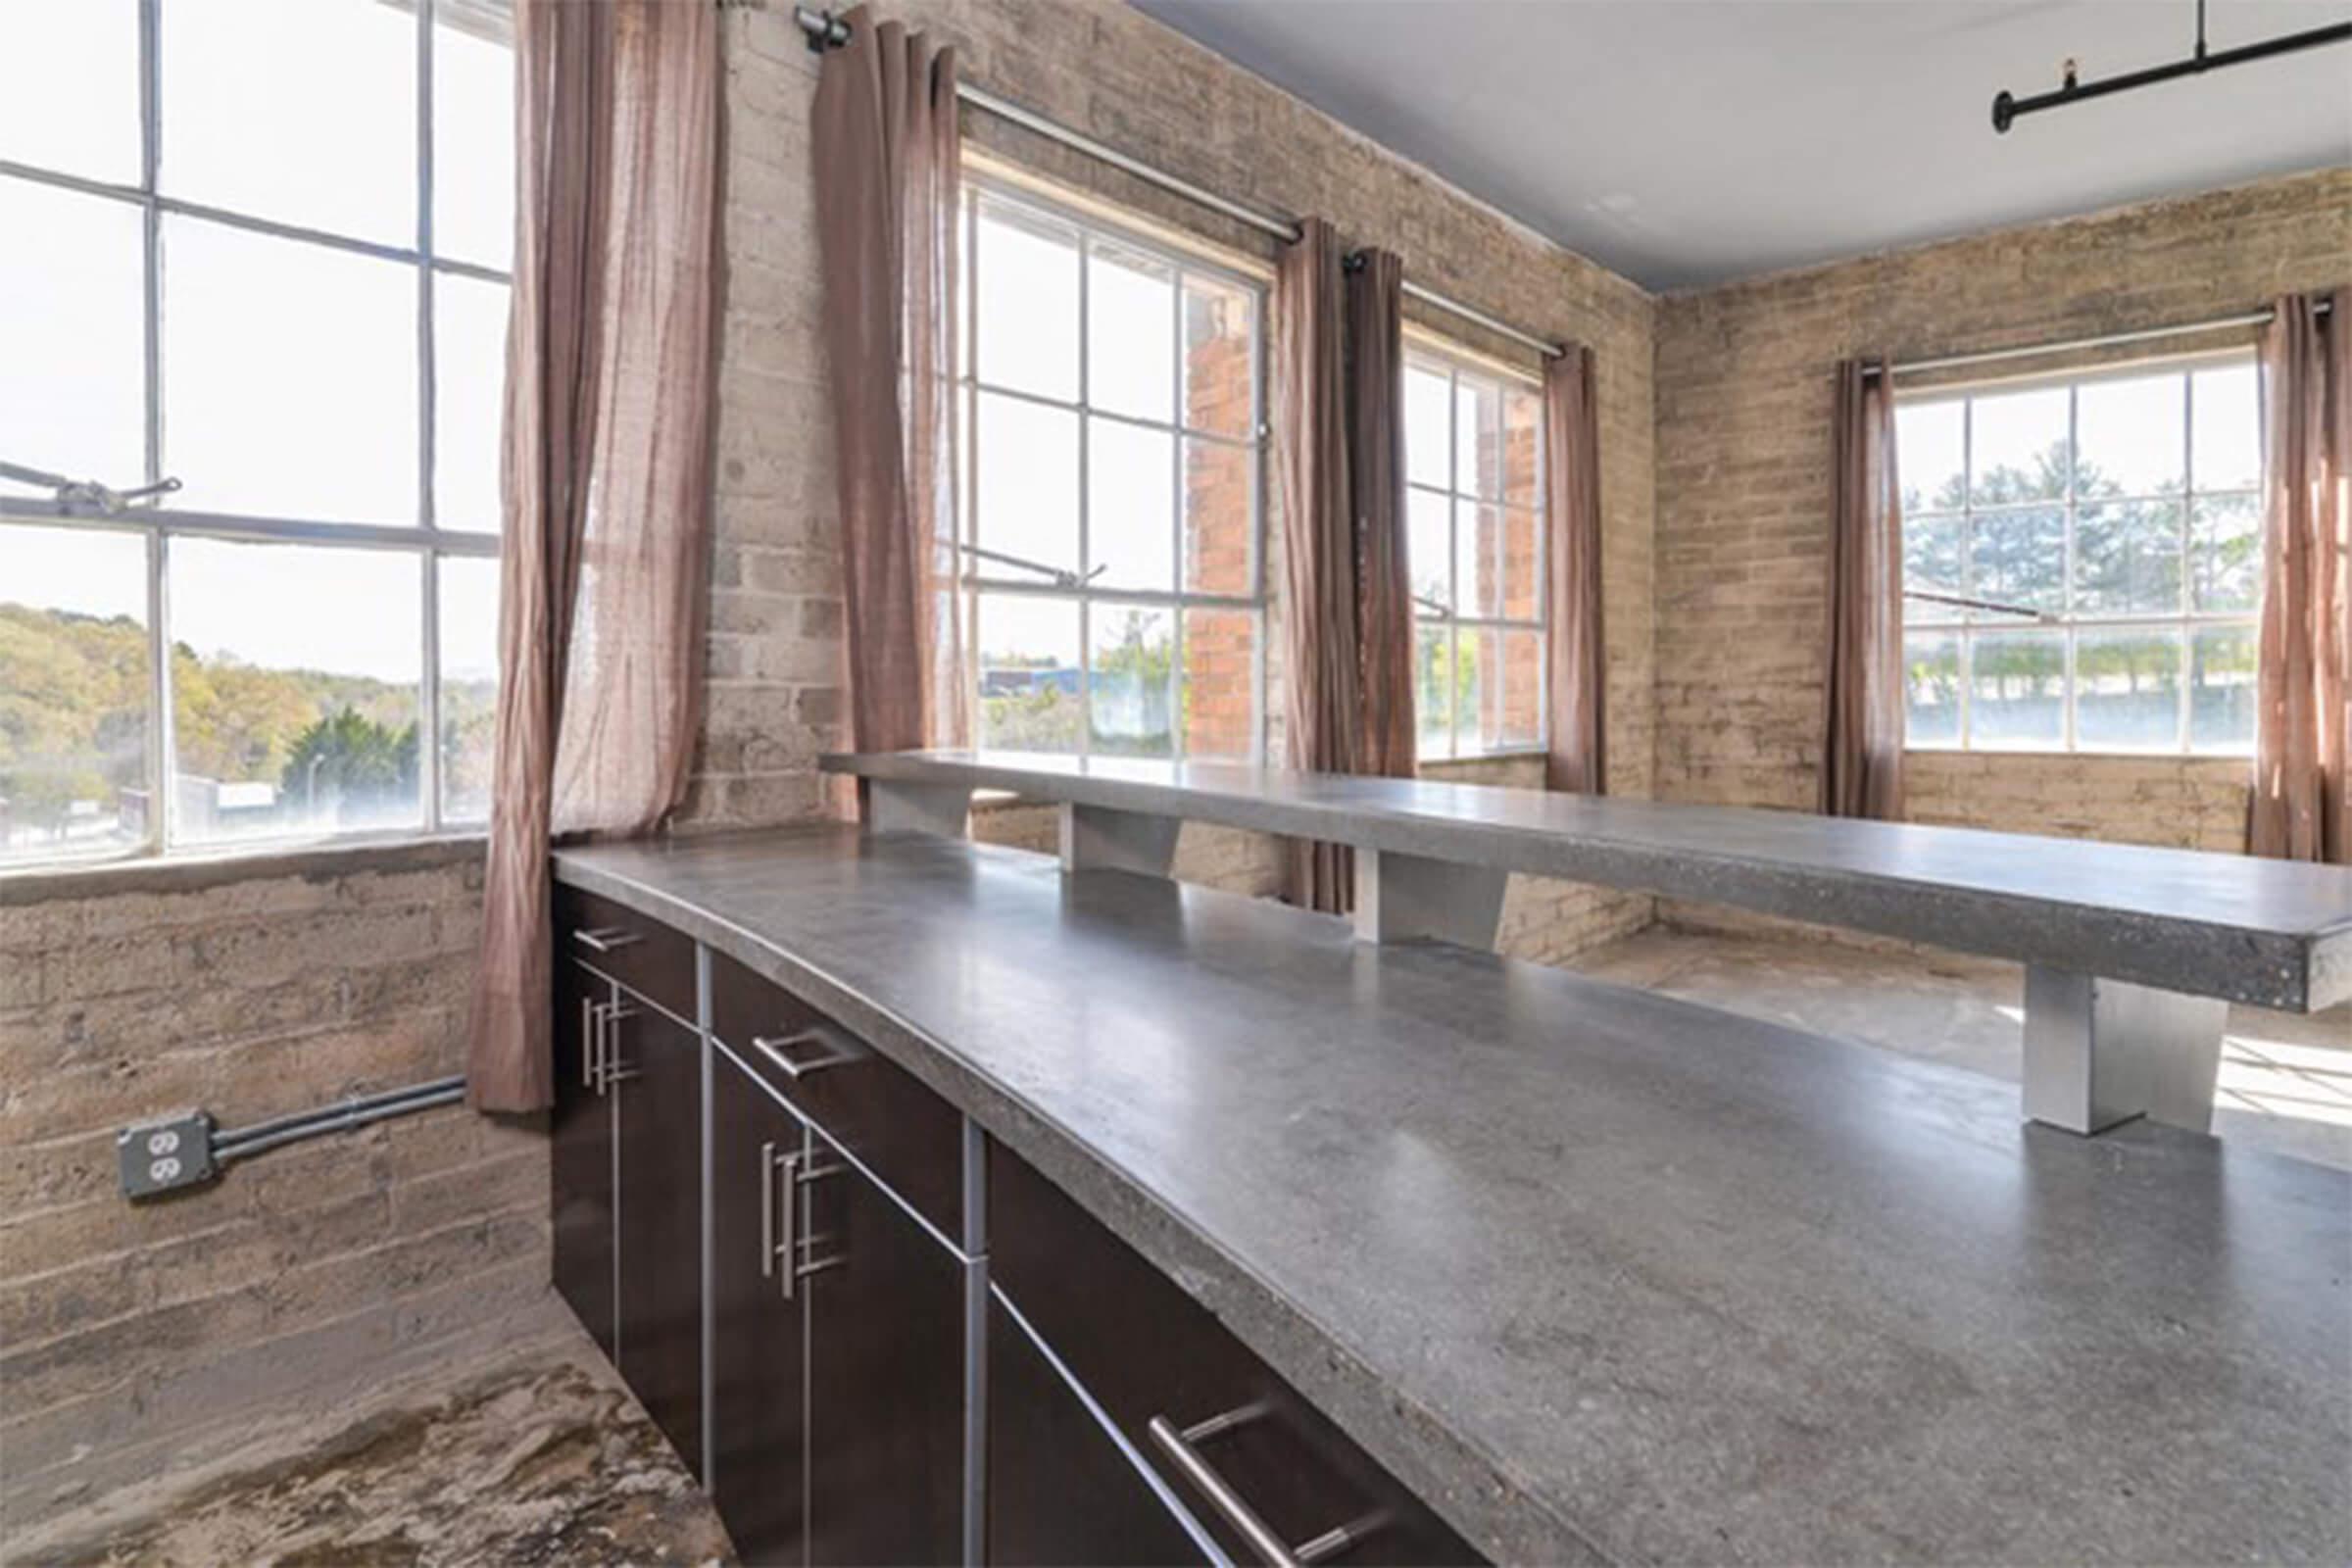 Concrete countertops at The Lofts at South Slope in Asheville, North Carolina.